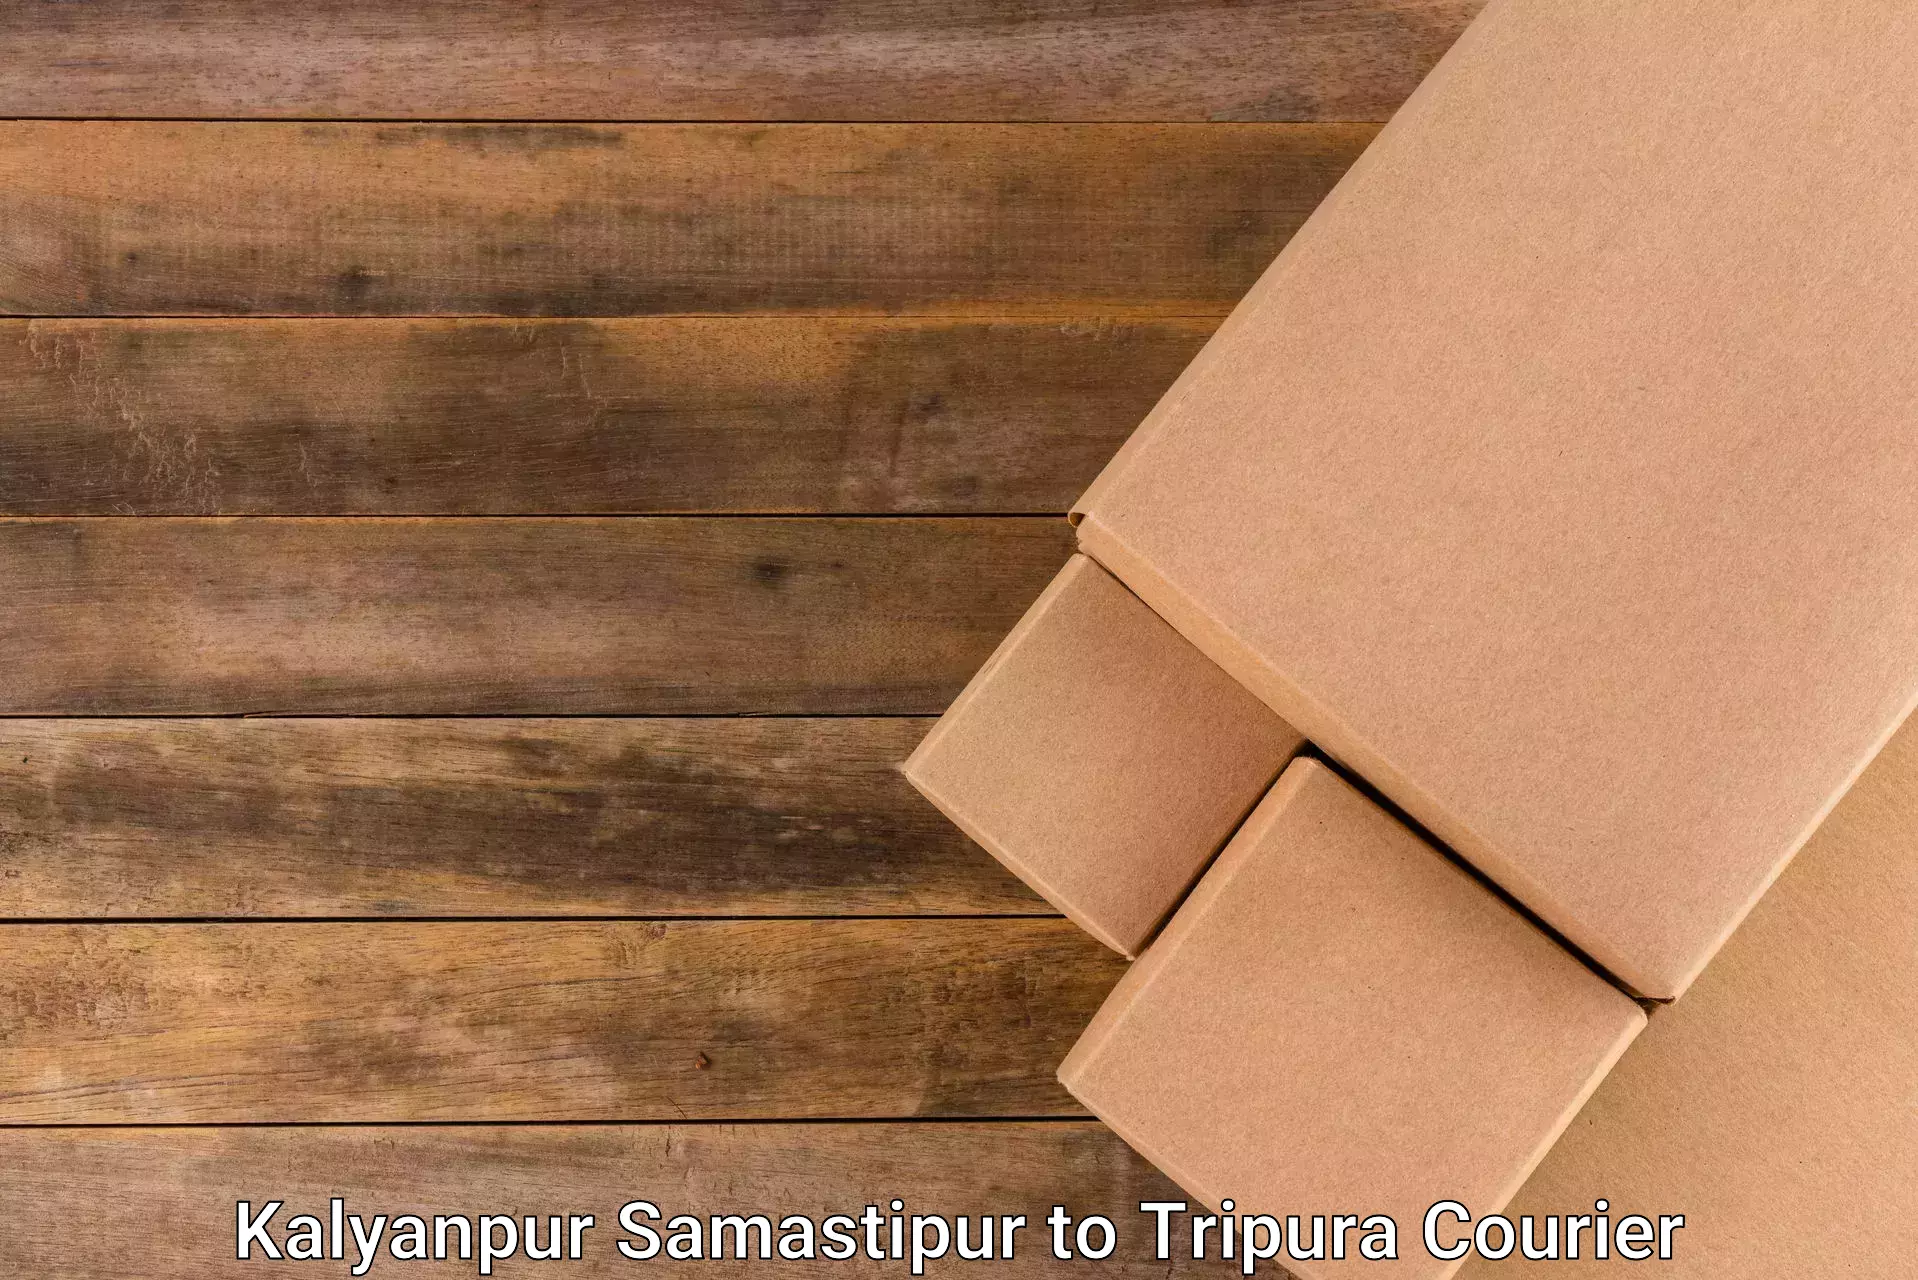 Specialized courier services Kalyanpur Samastipur to Agartala